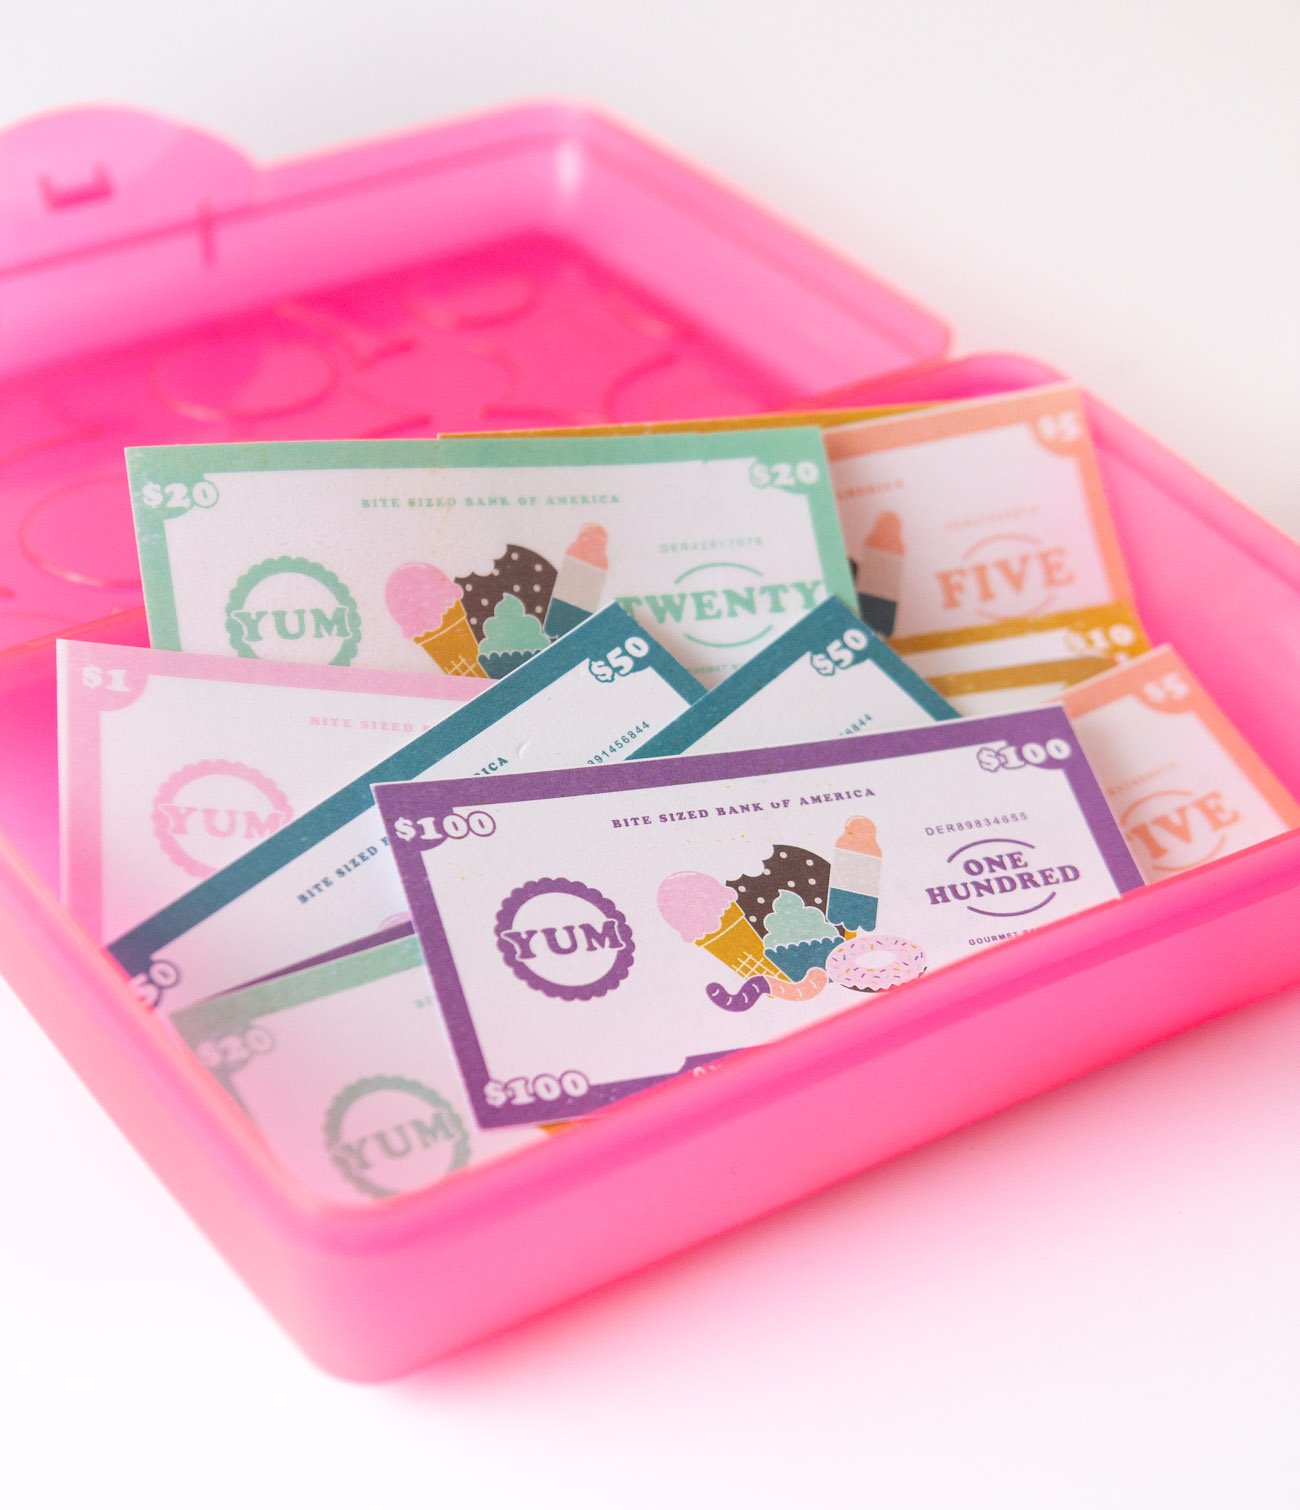 Storage for dessert themed free printable play money for kids, $1, $5, $10, $20, $50, $100